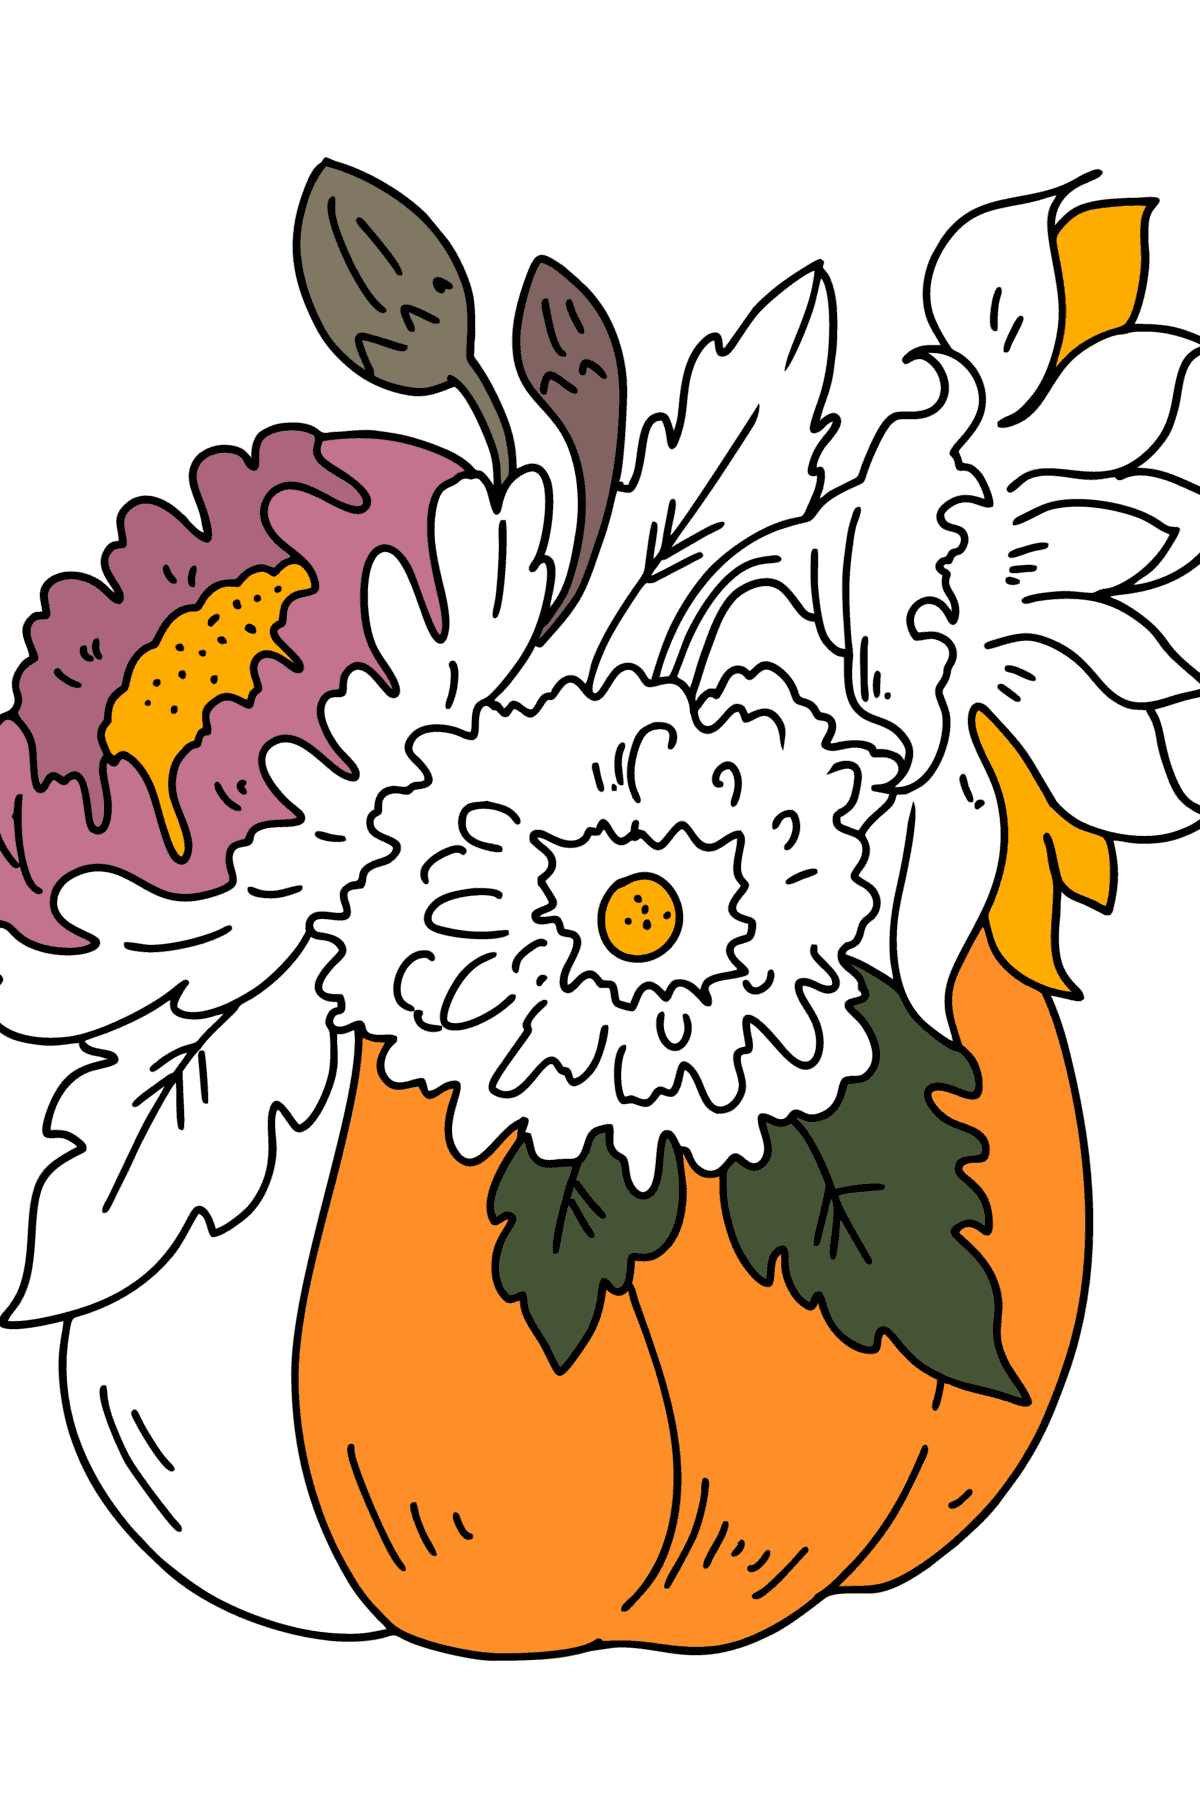 Coloring page Autumn - Pumpkin and Asters - Coloring Pages for Kids